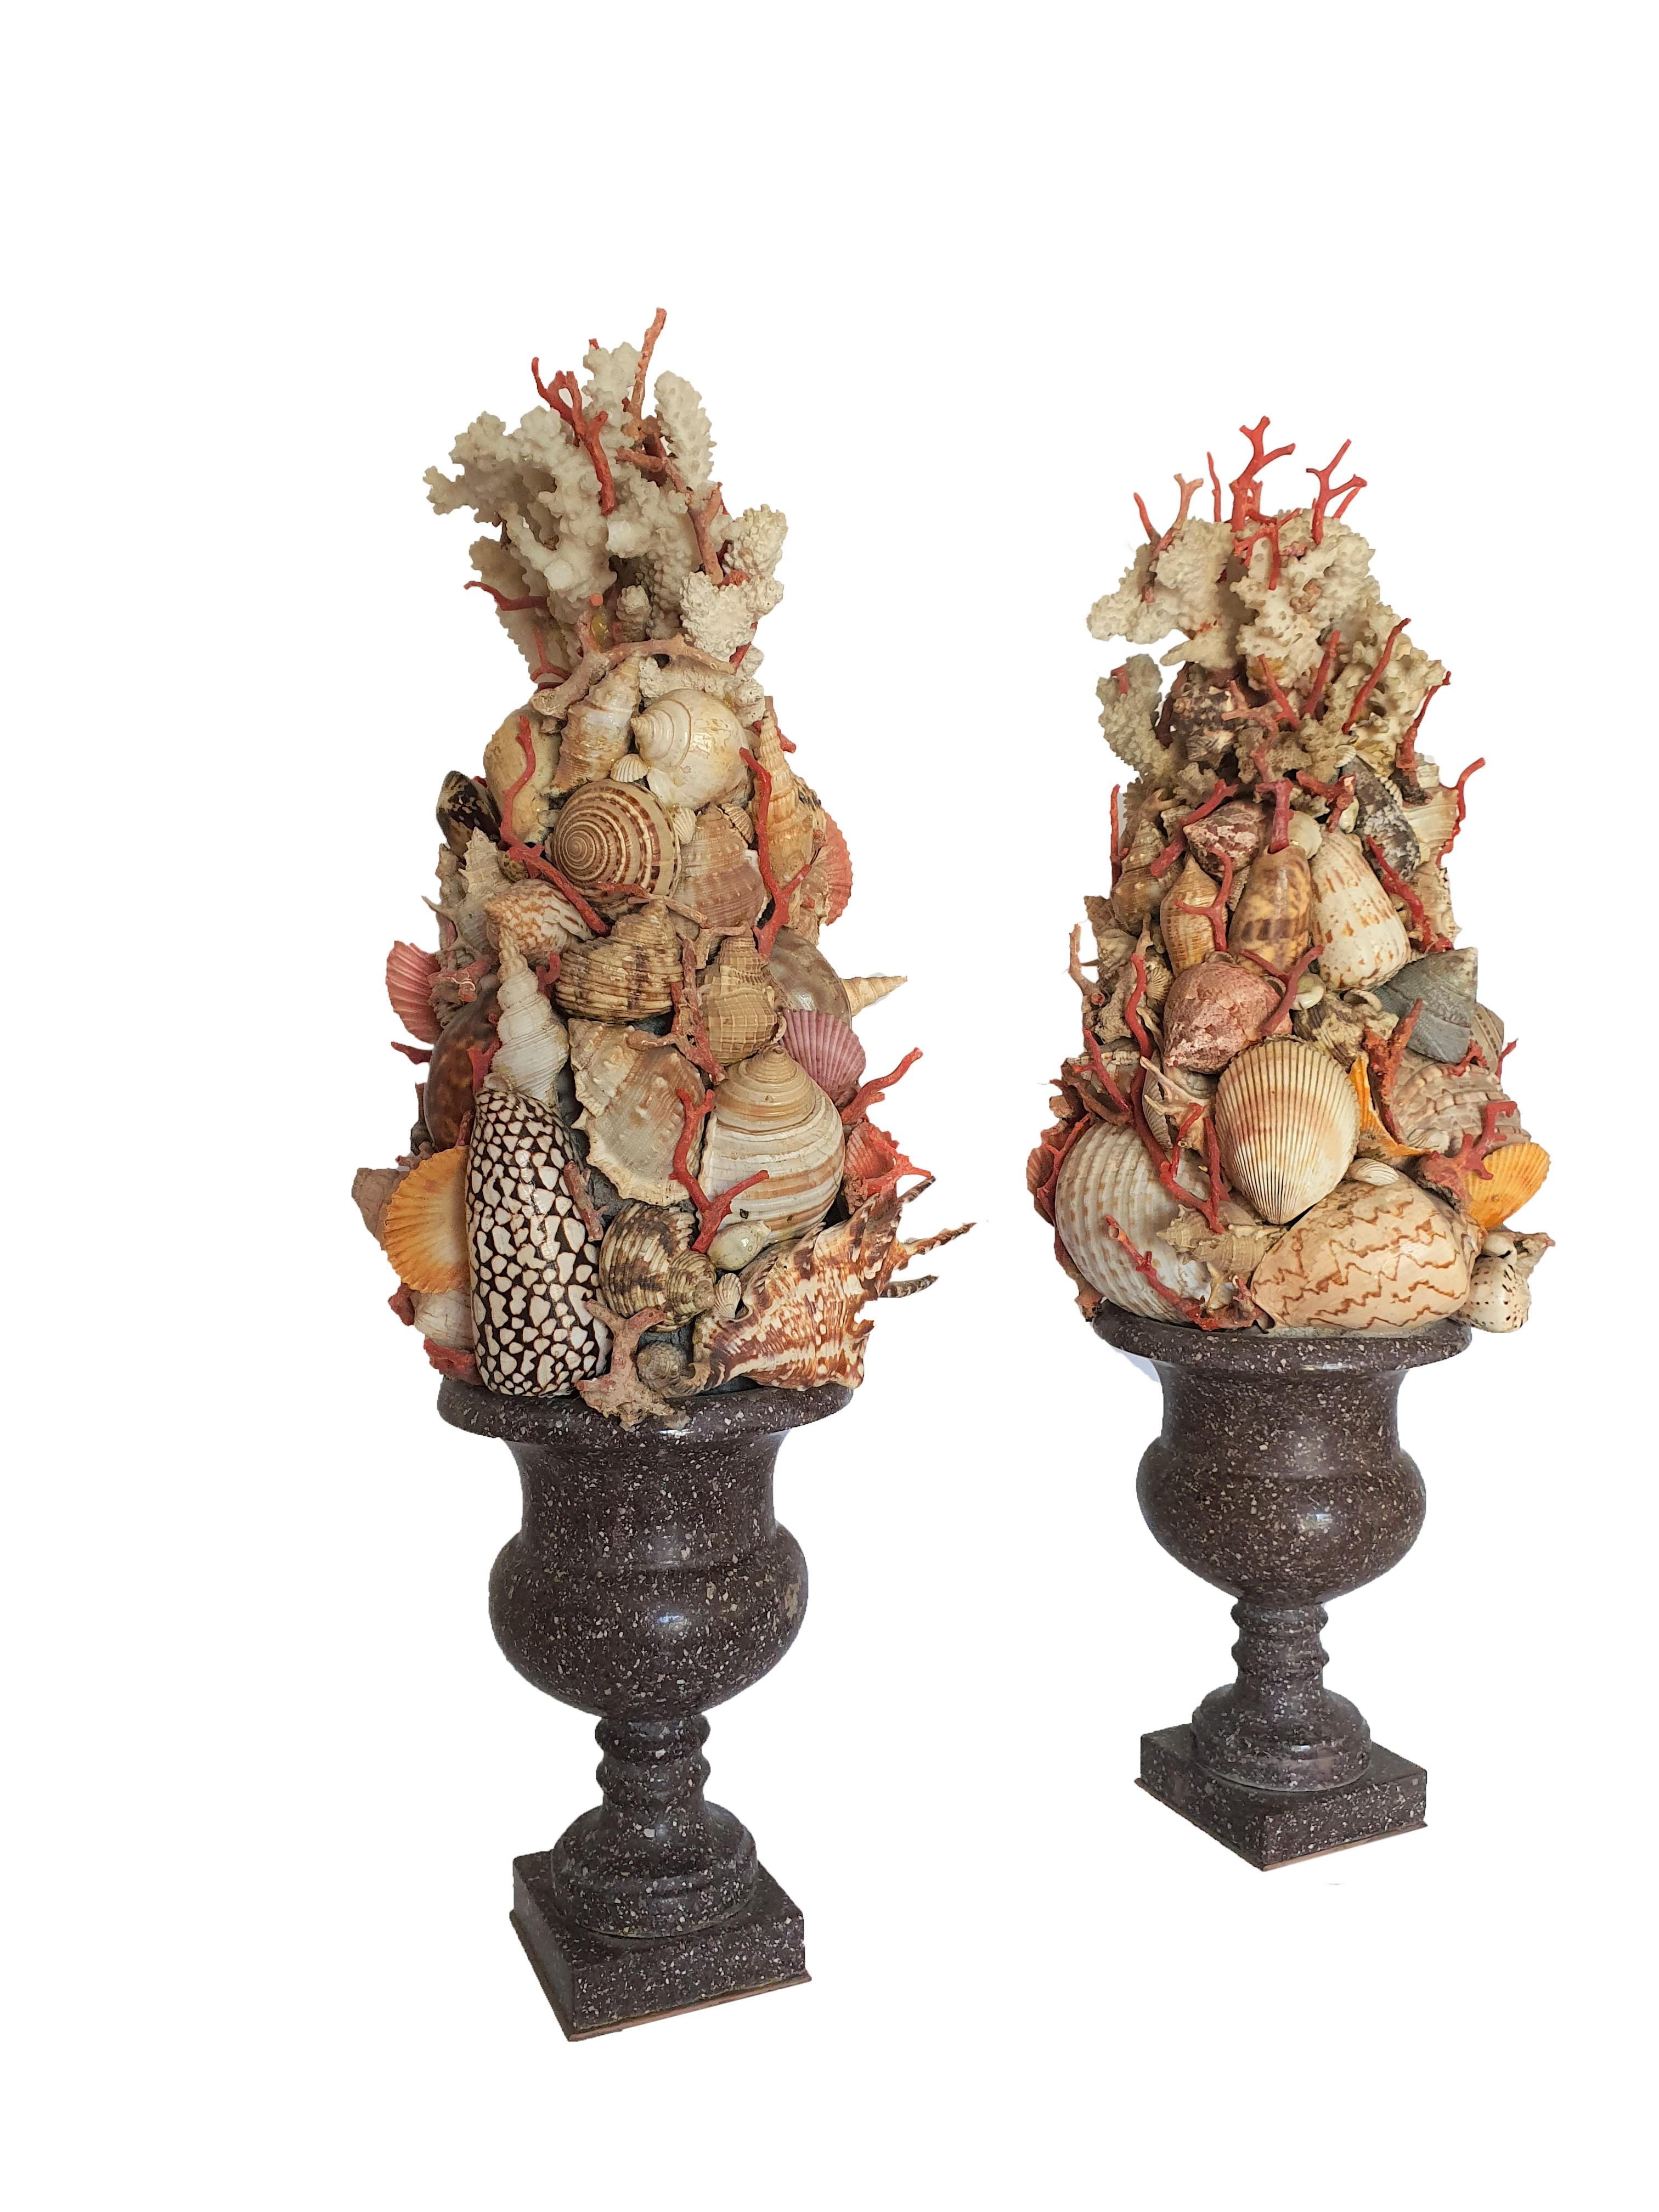 Napoleon III 19th Century Pair of Egyptian Porphyry Vases with Shells and Coral from Trapani